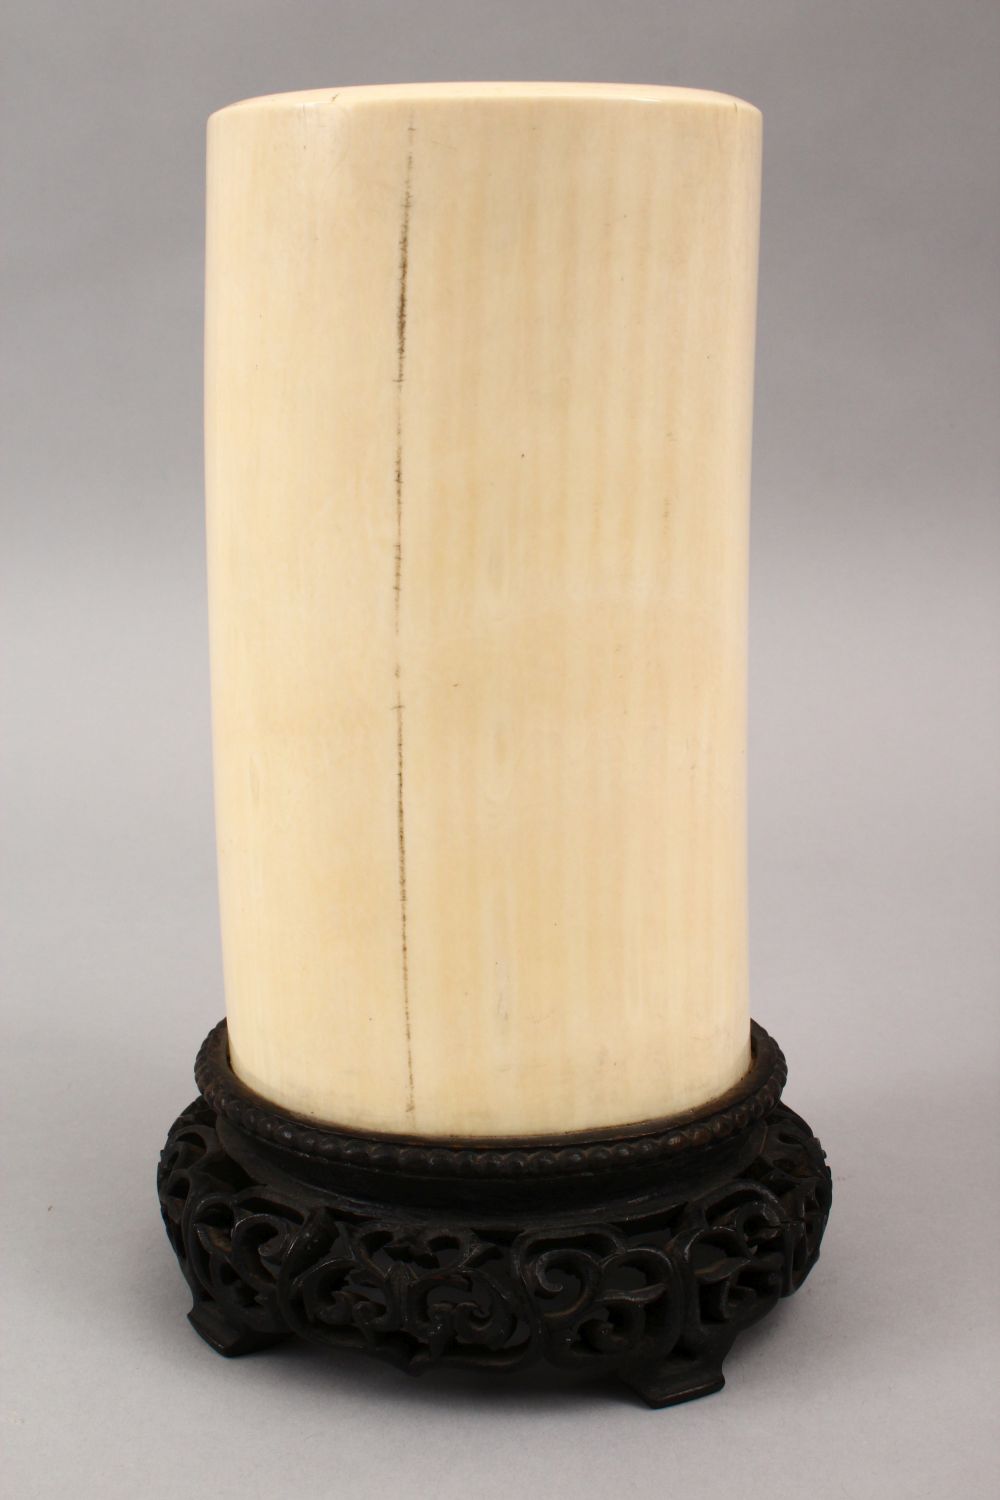 A GOOD CHINESE REPUBLIC PERIOD CARVED IVORY TUSK VASE ON STAND, the vase decorated with scenes of - Image 7 of 15